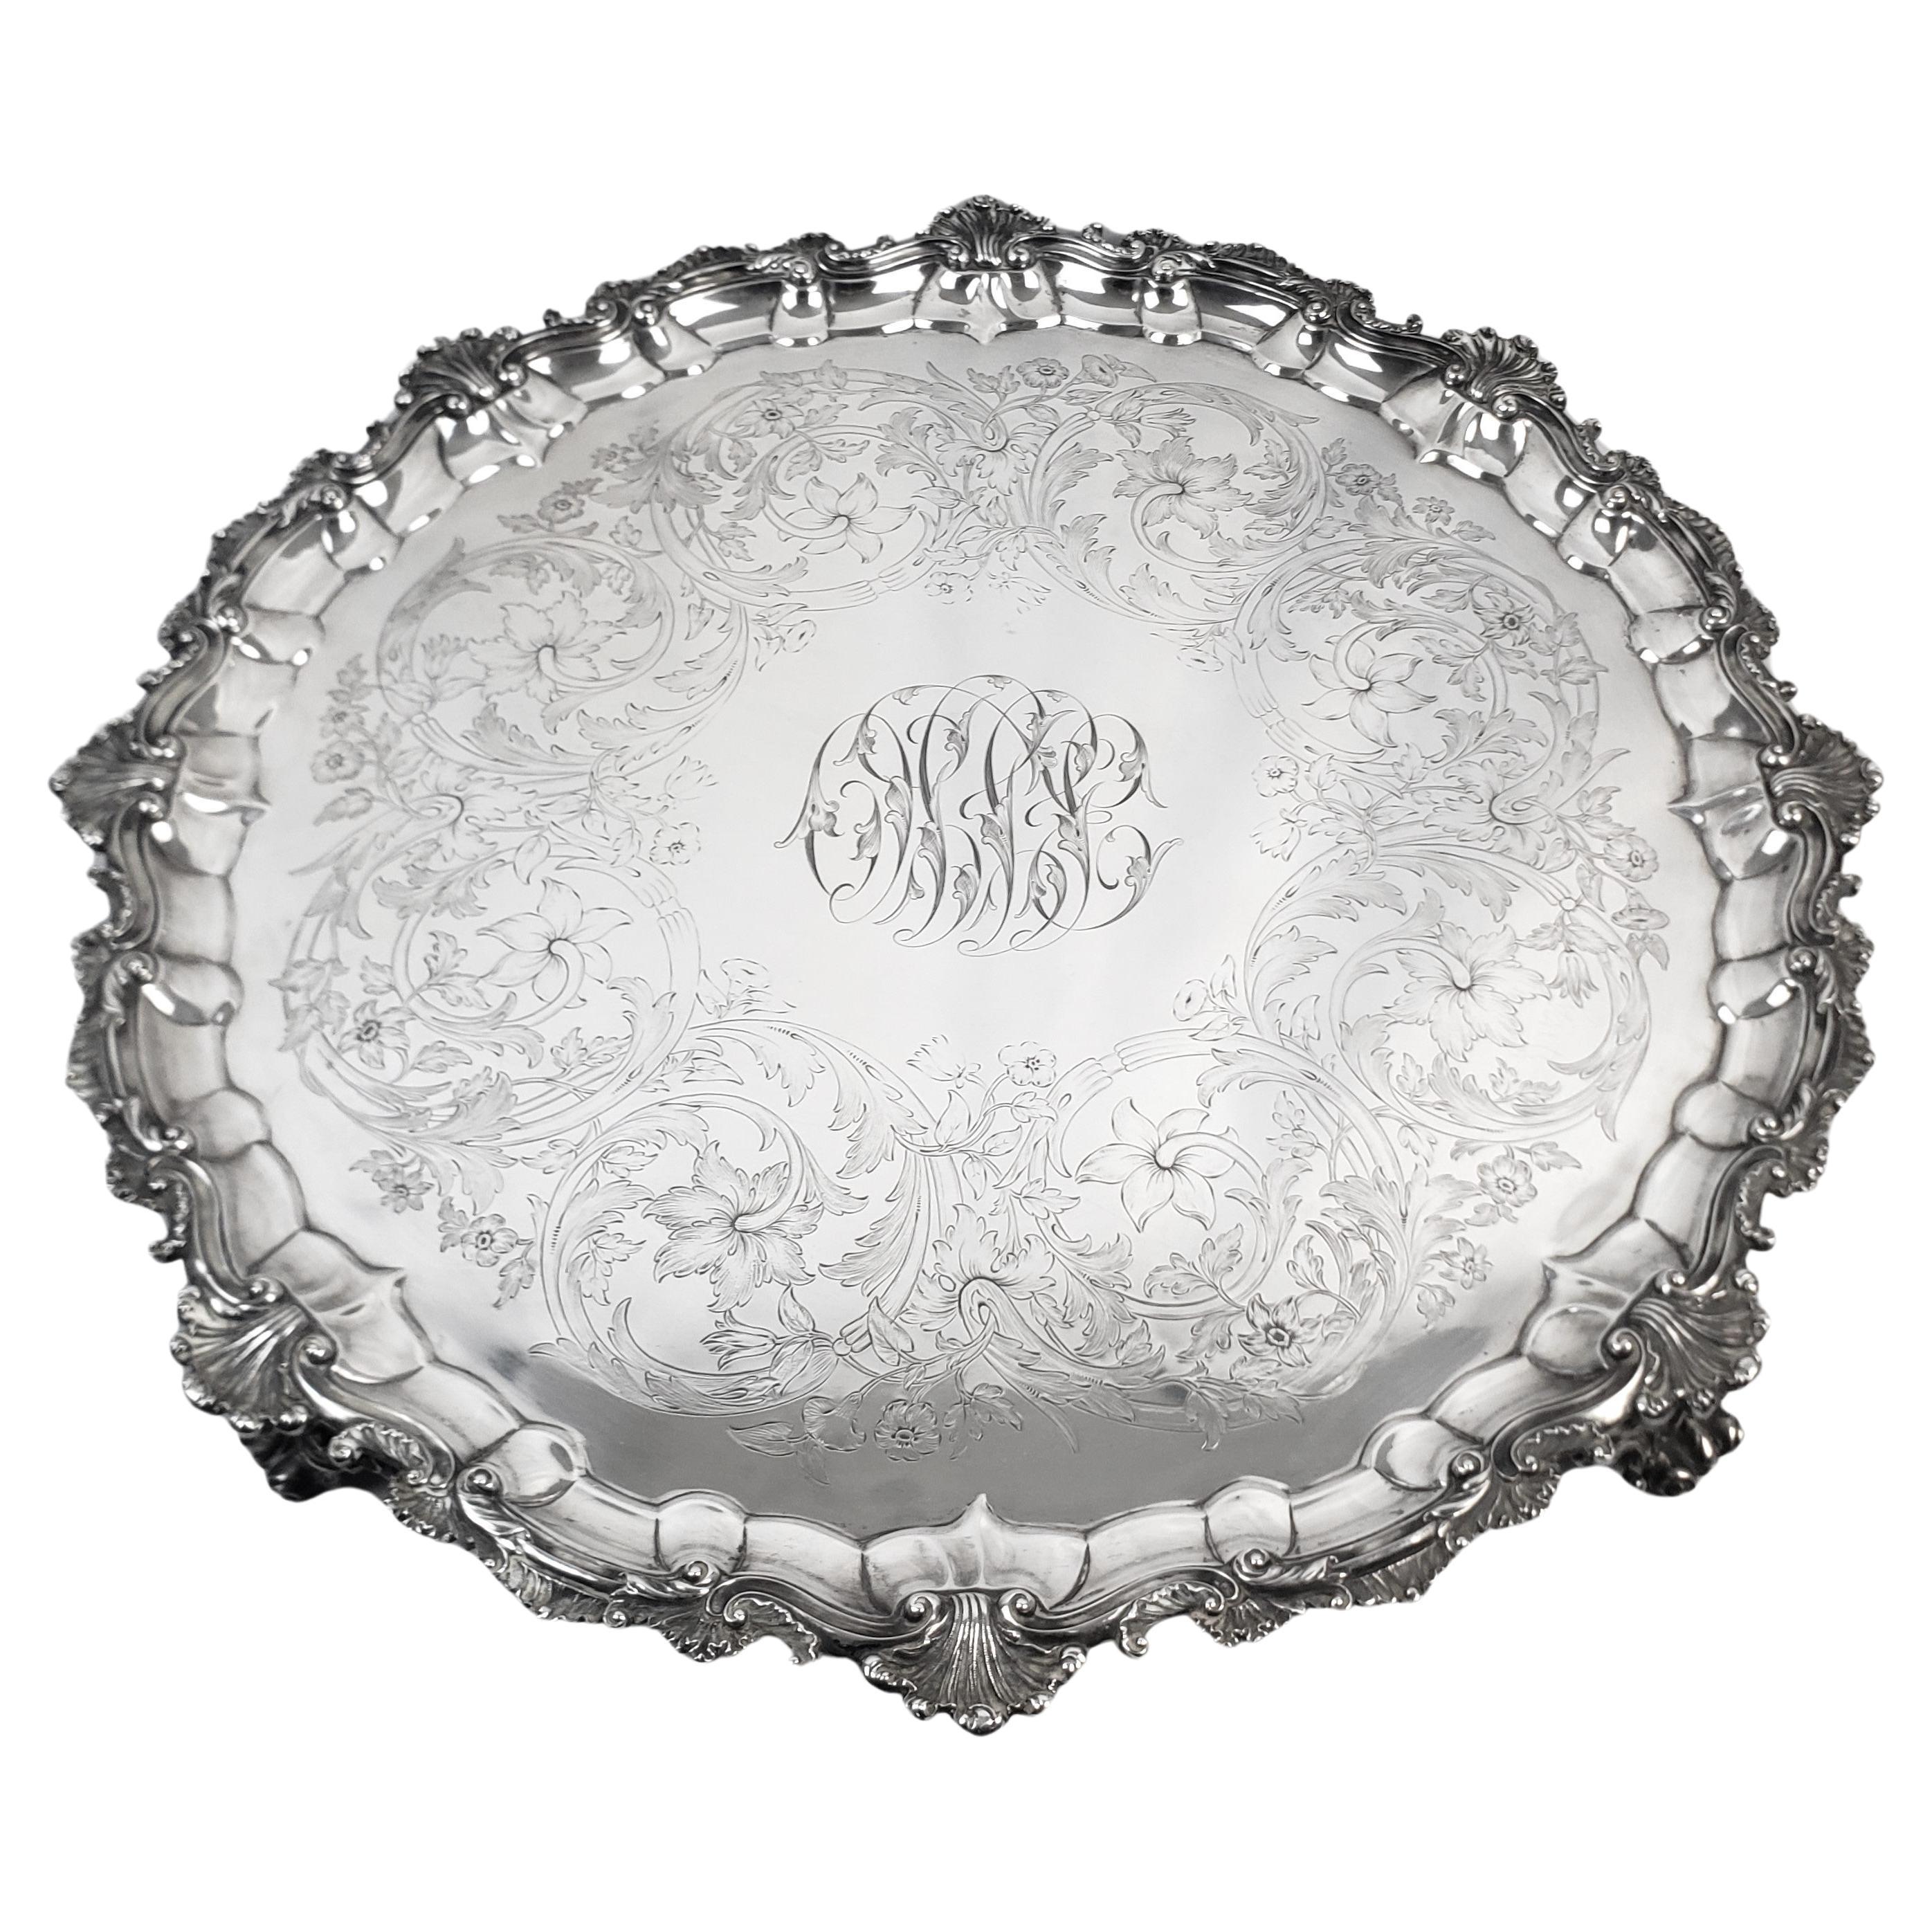 Huge Antique Sterling Silver Salver or Footed Tray with Ornate Floral Engraving For Sale